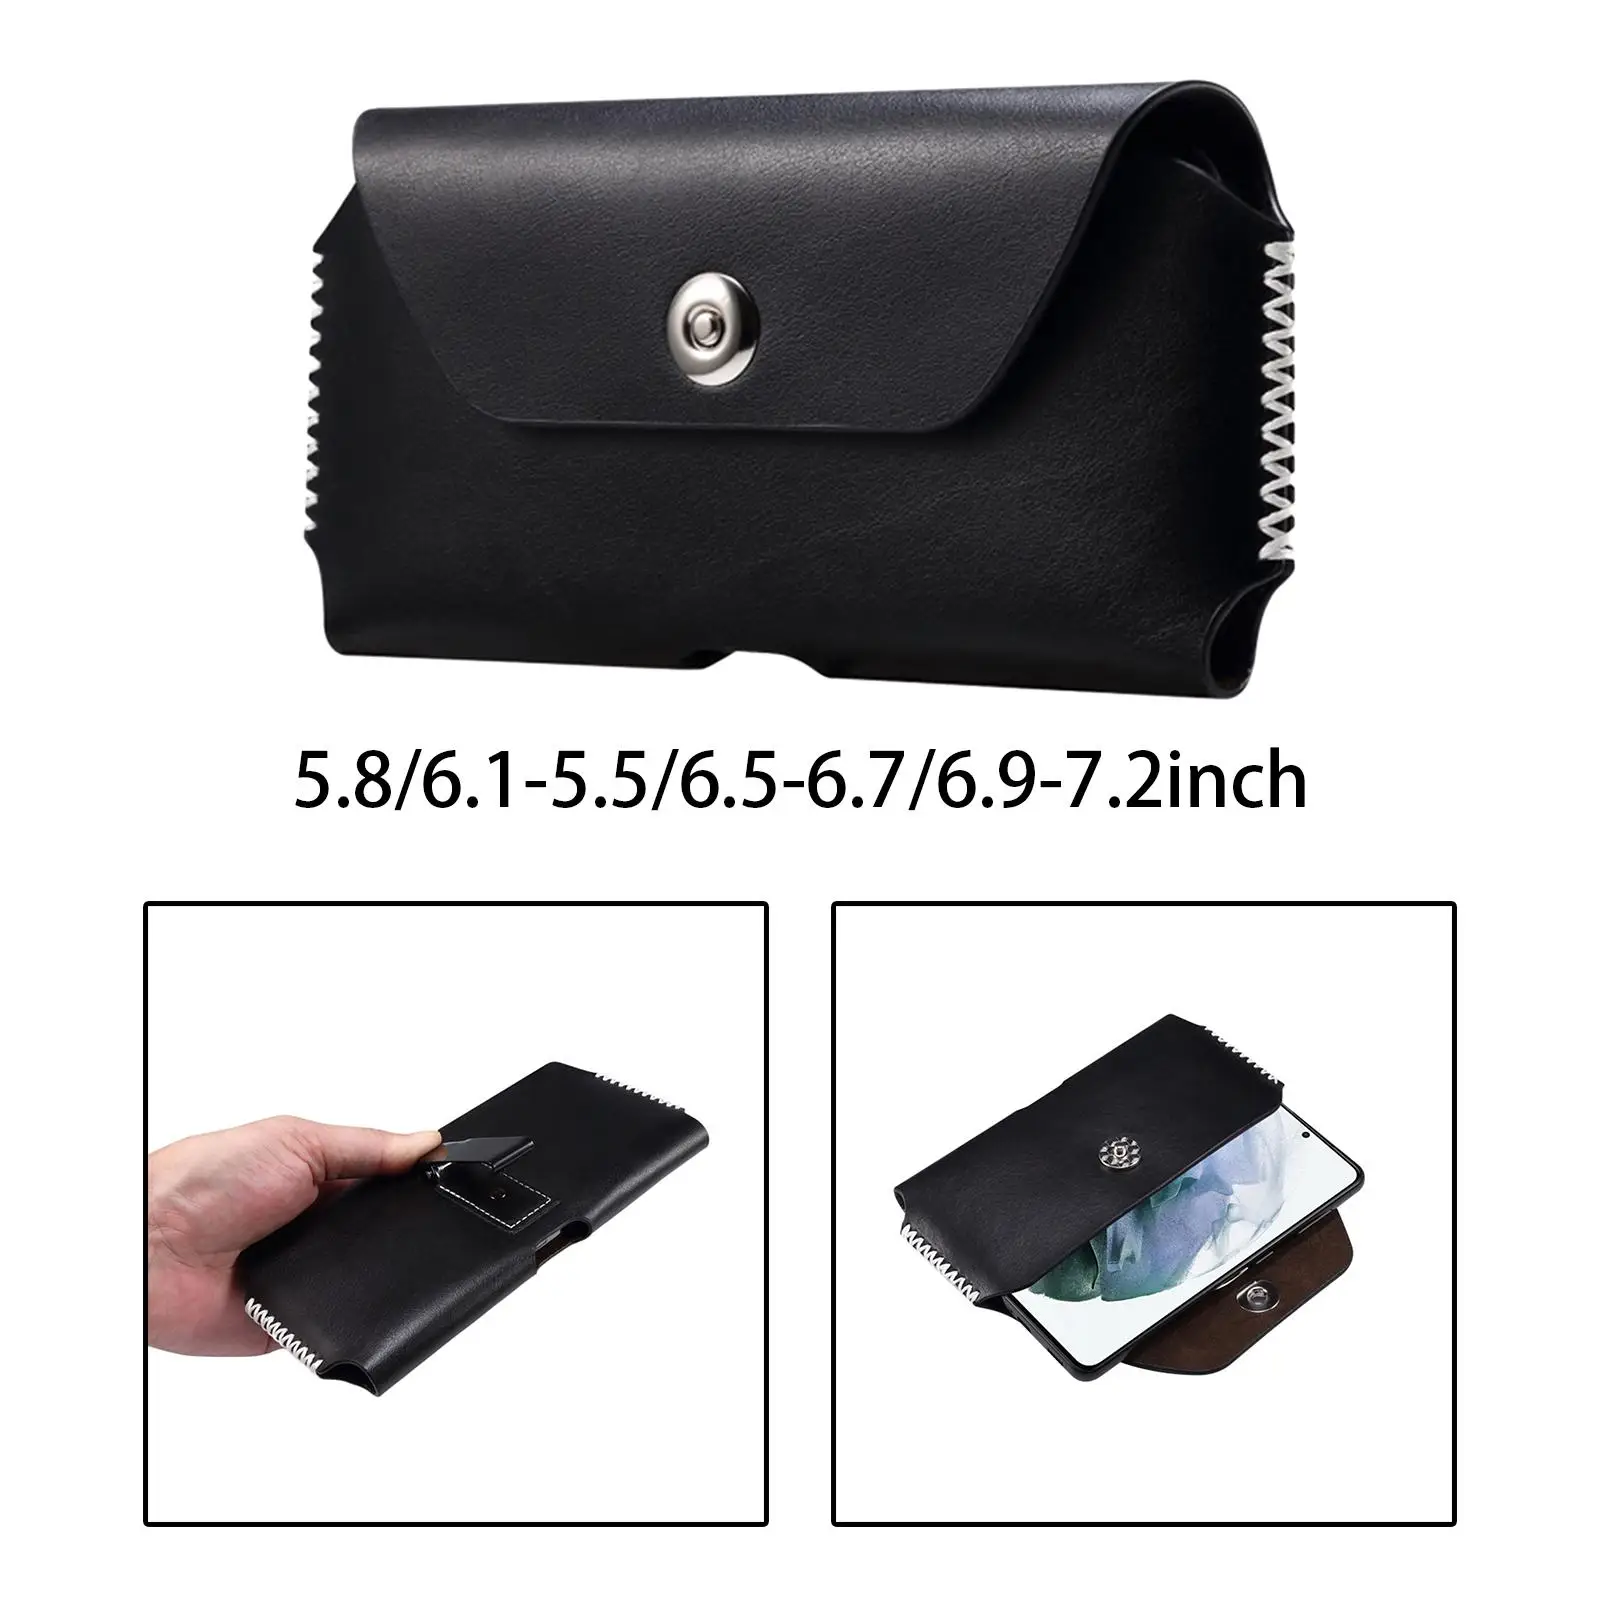 Outdoor PU Leather Belt Pouch for Phone Belt Clip Bag Splash Proof Magnetic Closure Wallet Men Gift for iOS Android Phones Black